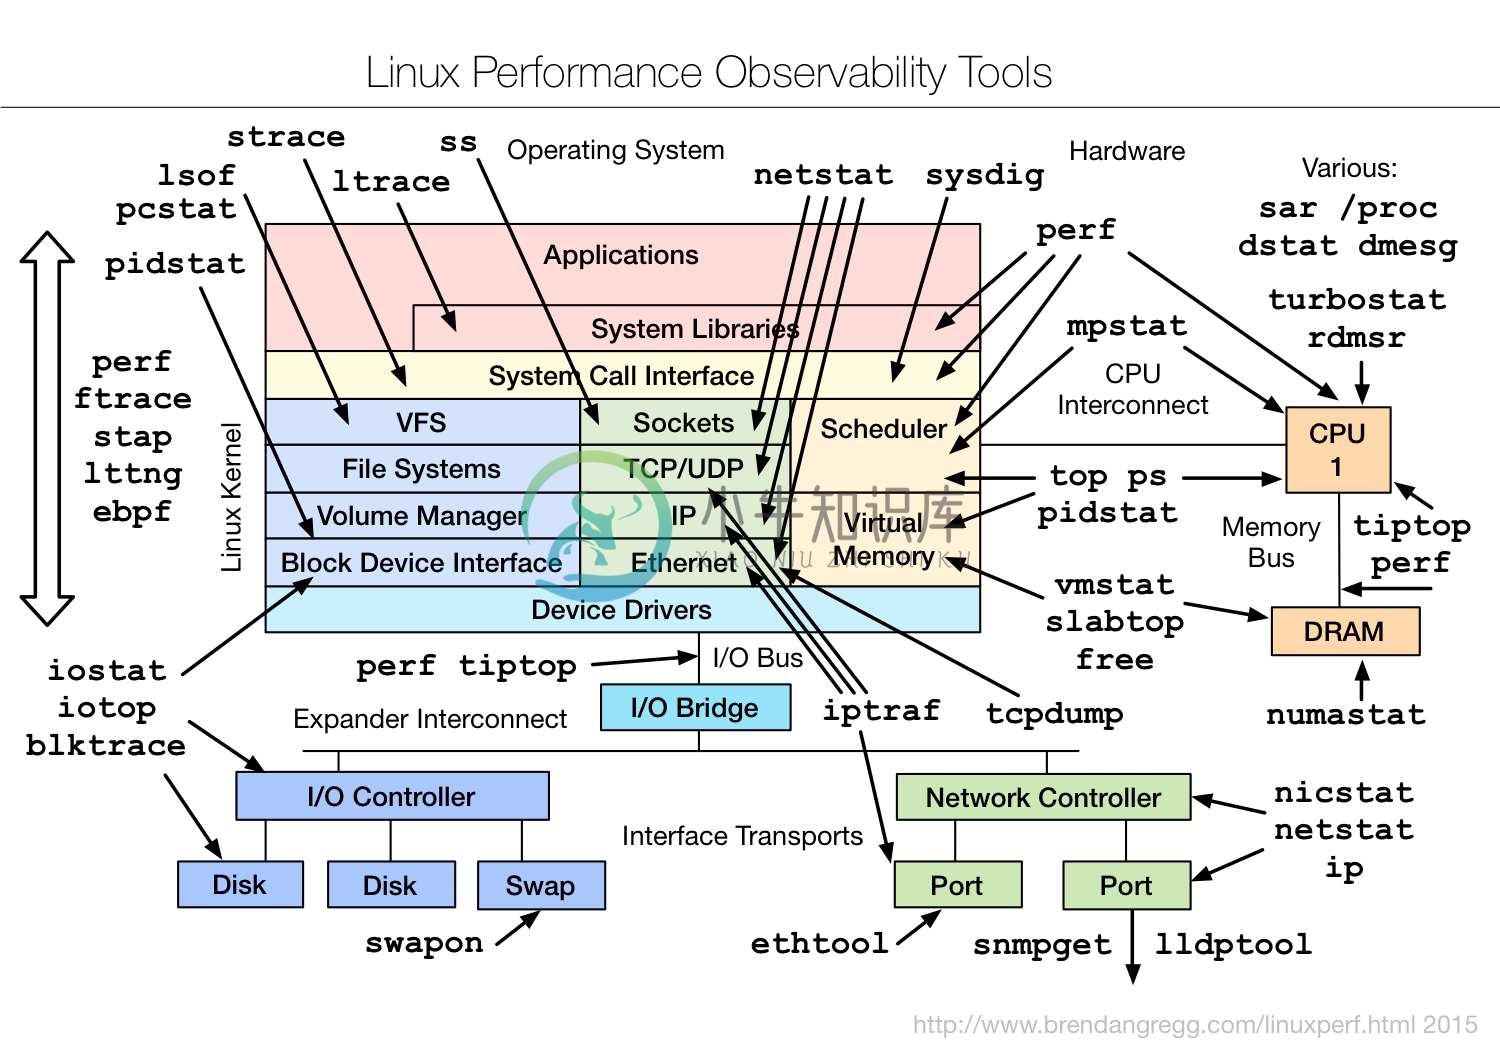 **Linux Perf Observability Tools Map**